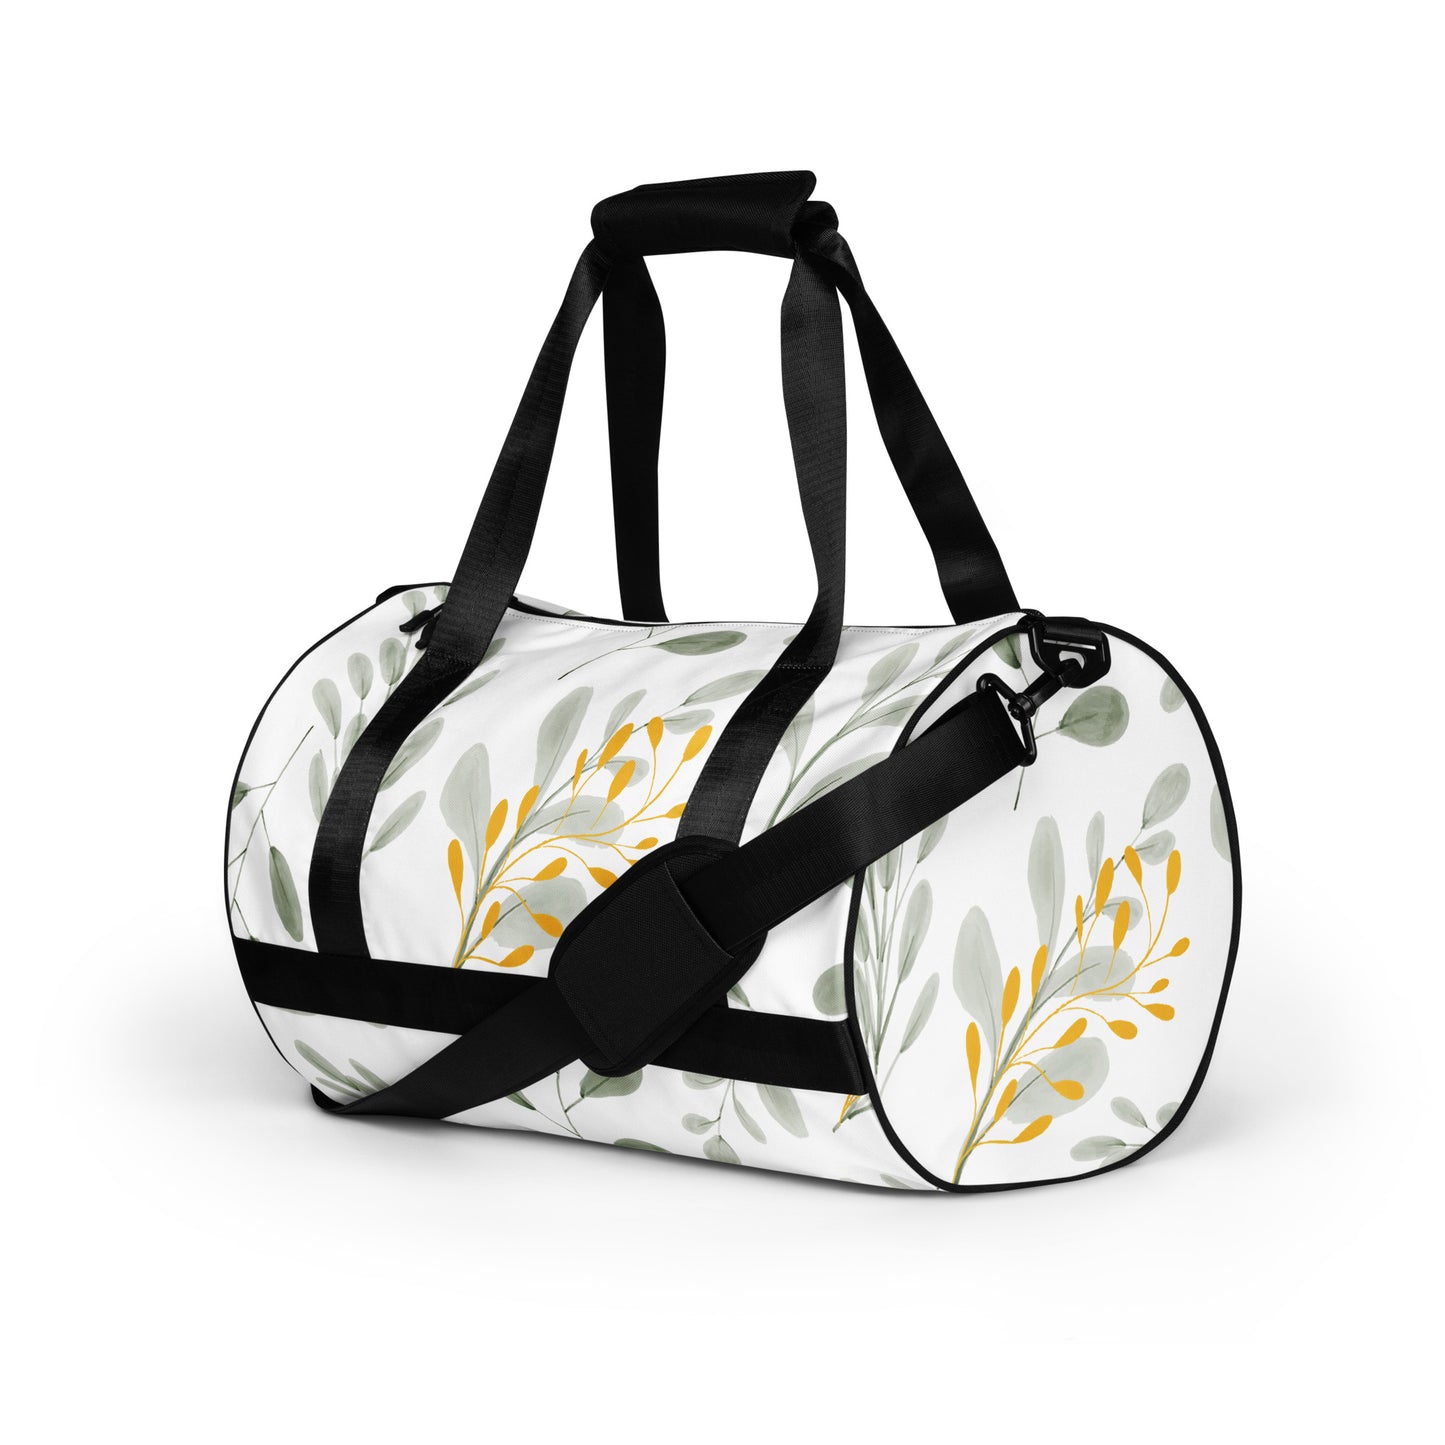 Watercolor Branch - Sustainably Made Gym Bag